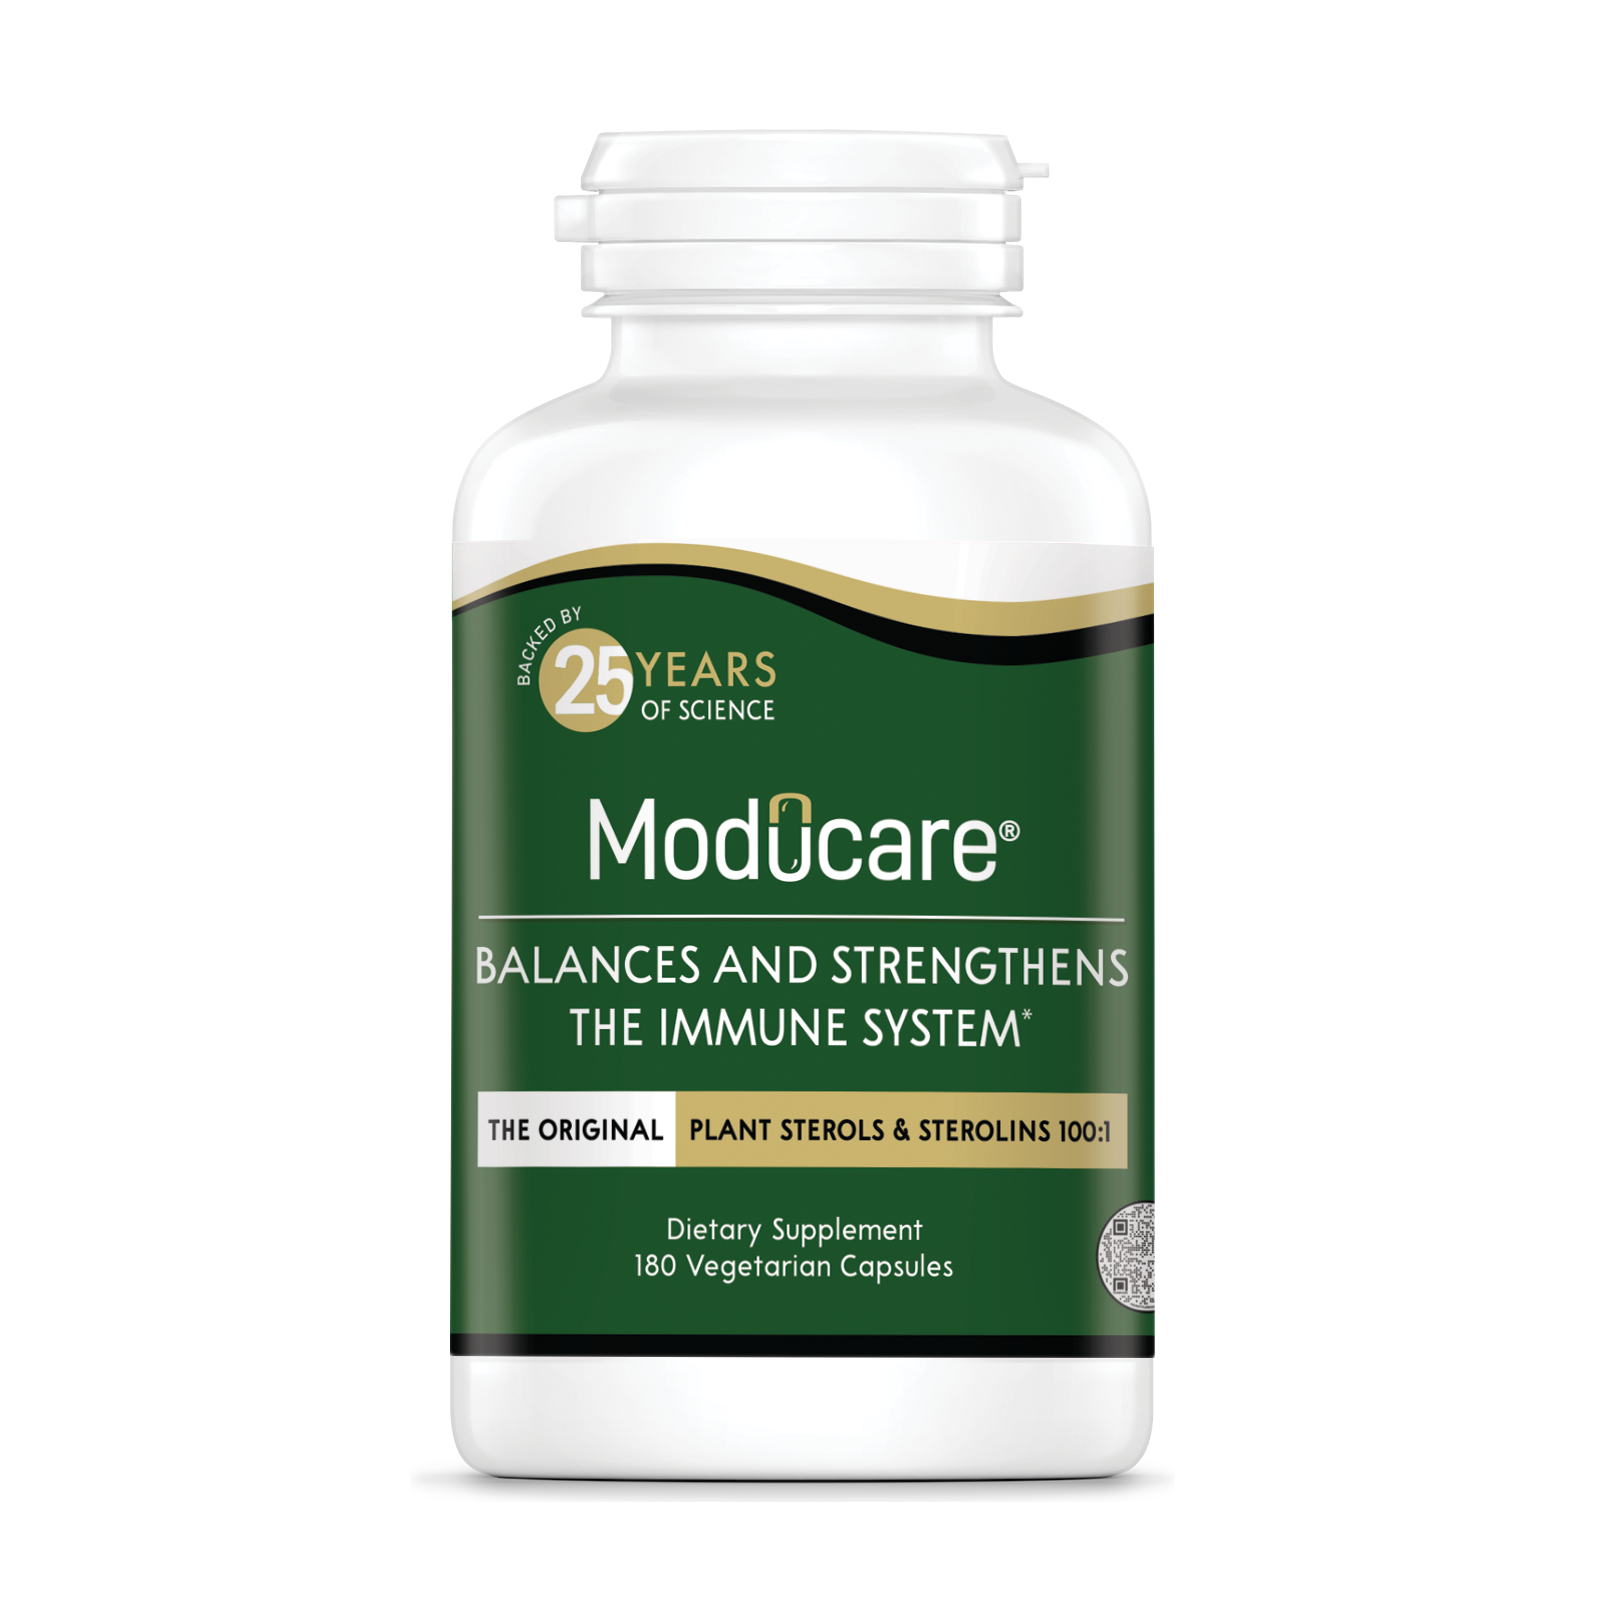 Kyolic Moducare® Daily Immune Support